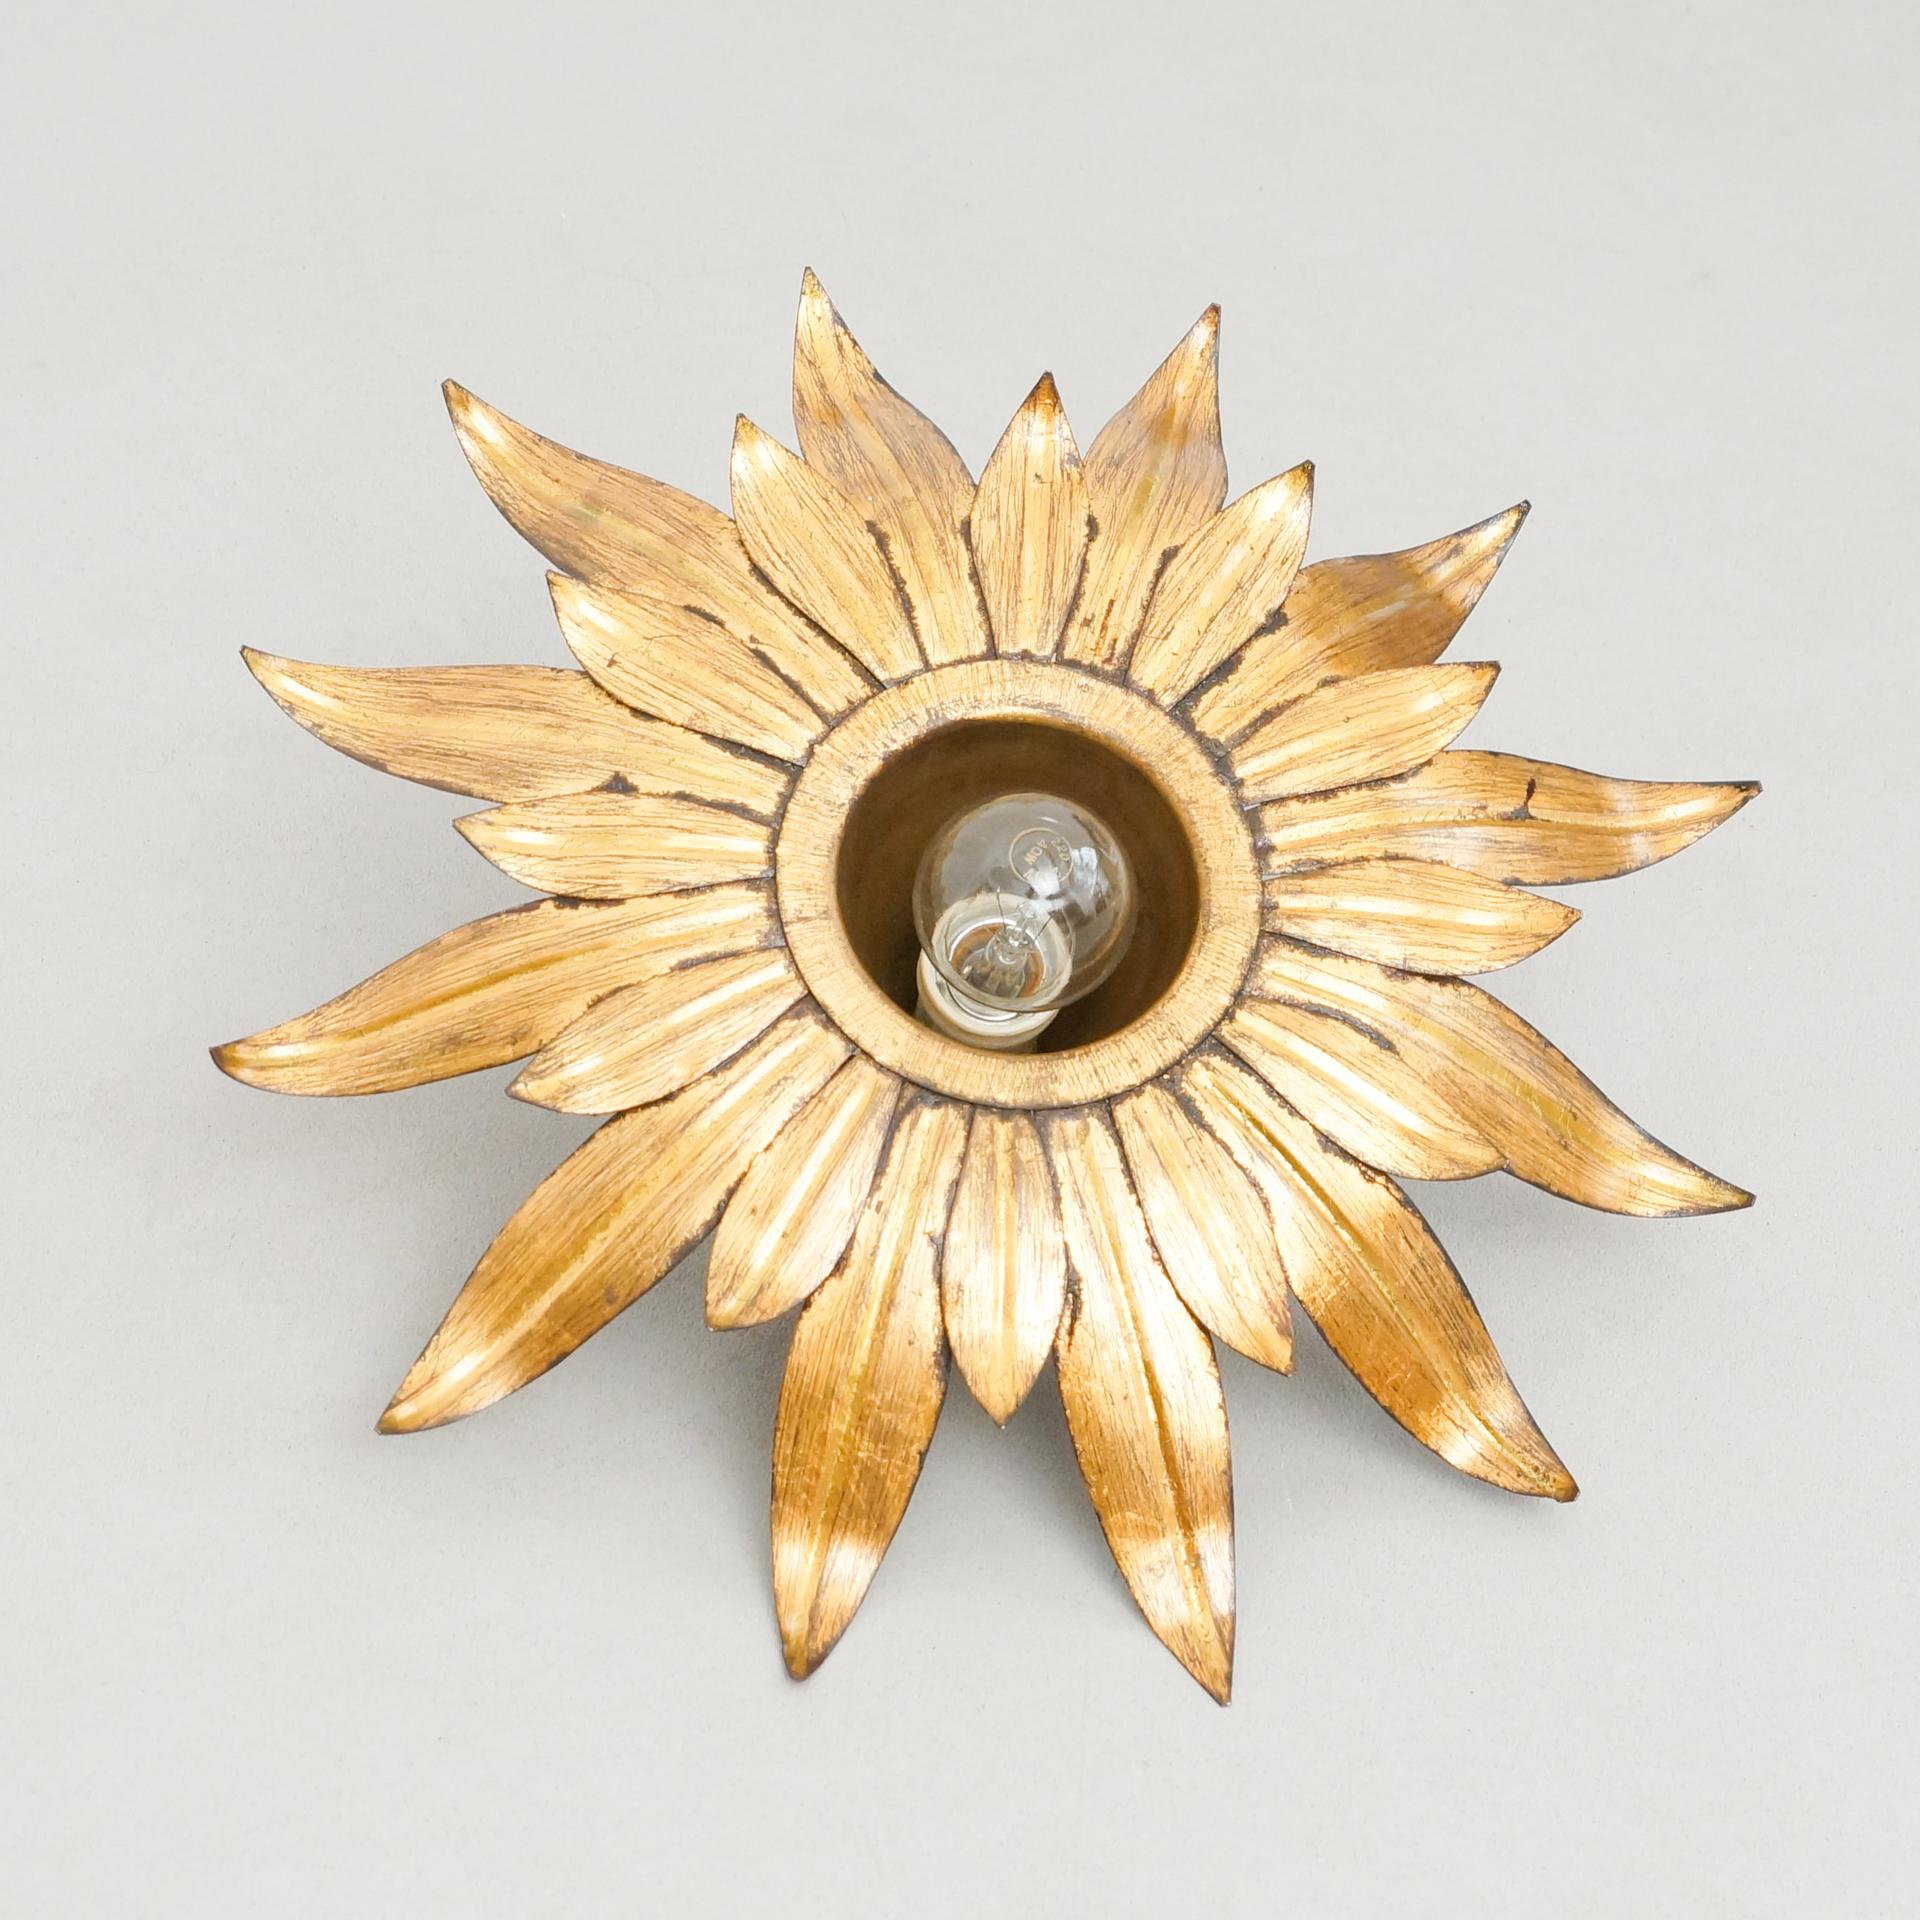 Mid-Century Modern sunburst brass pendant lamp, circa 1960
Traditionally manufactured in France.
By unknown designer.

In original condition with minor wear consistent of age and use, preserving a beautiful patina.

Electrification has not been